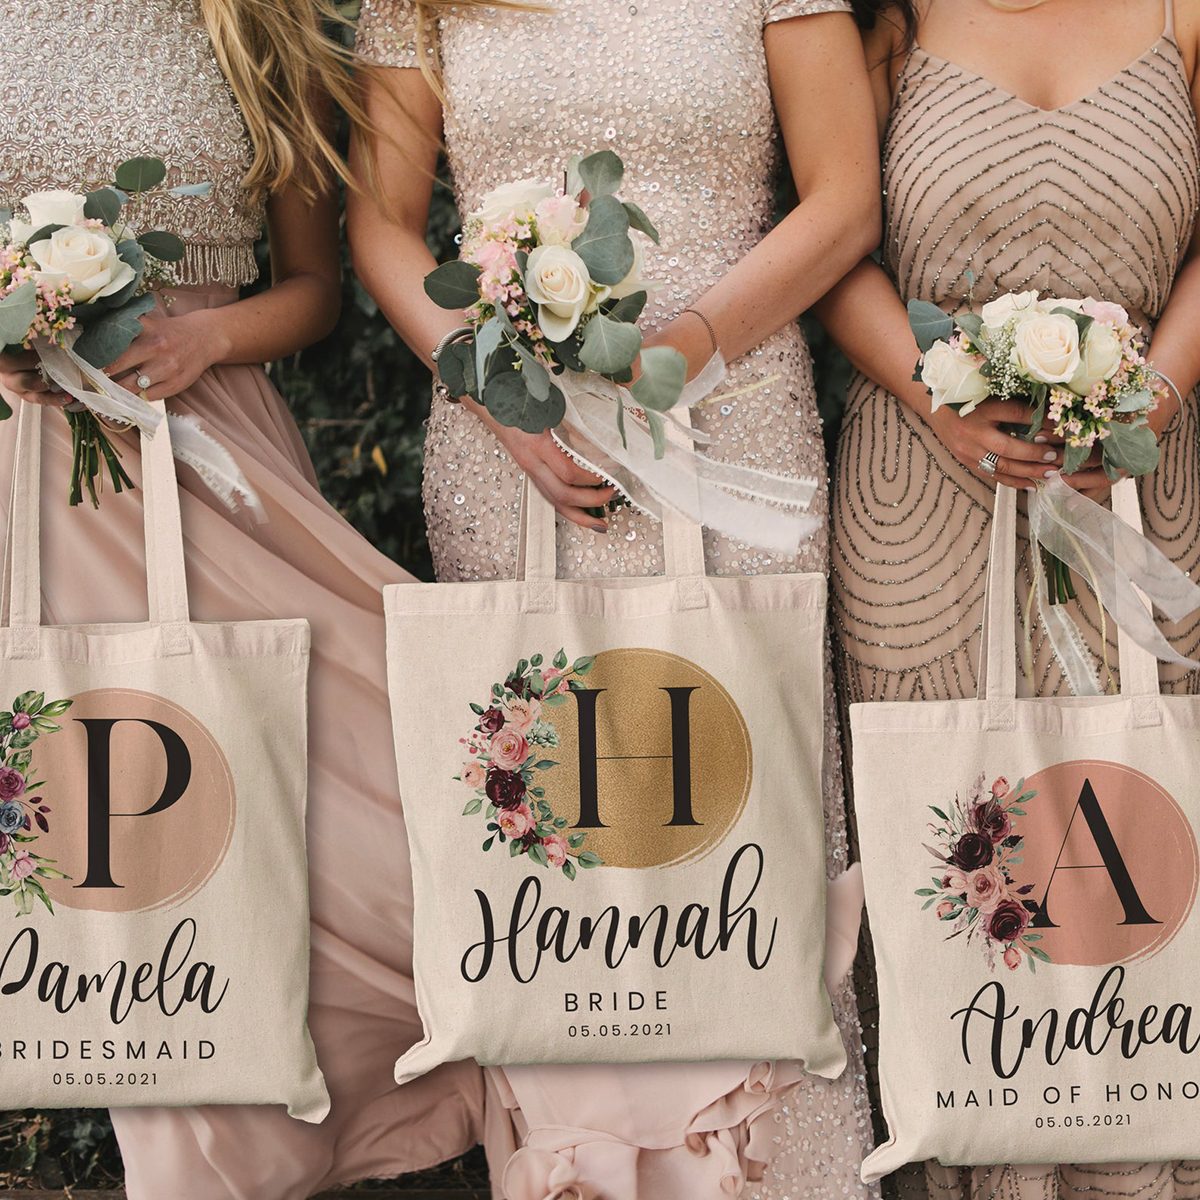 Bridesmaid Gifts: 25 Beautiful Ideas for Every Budget